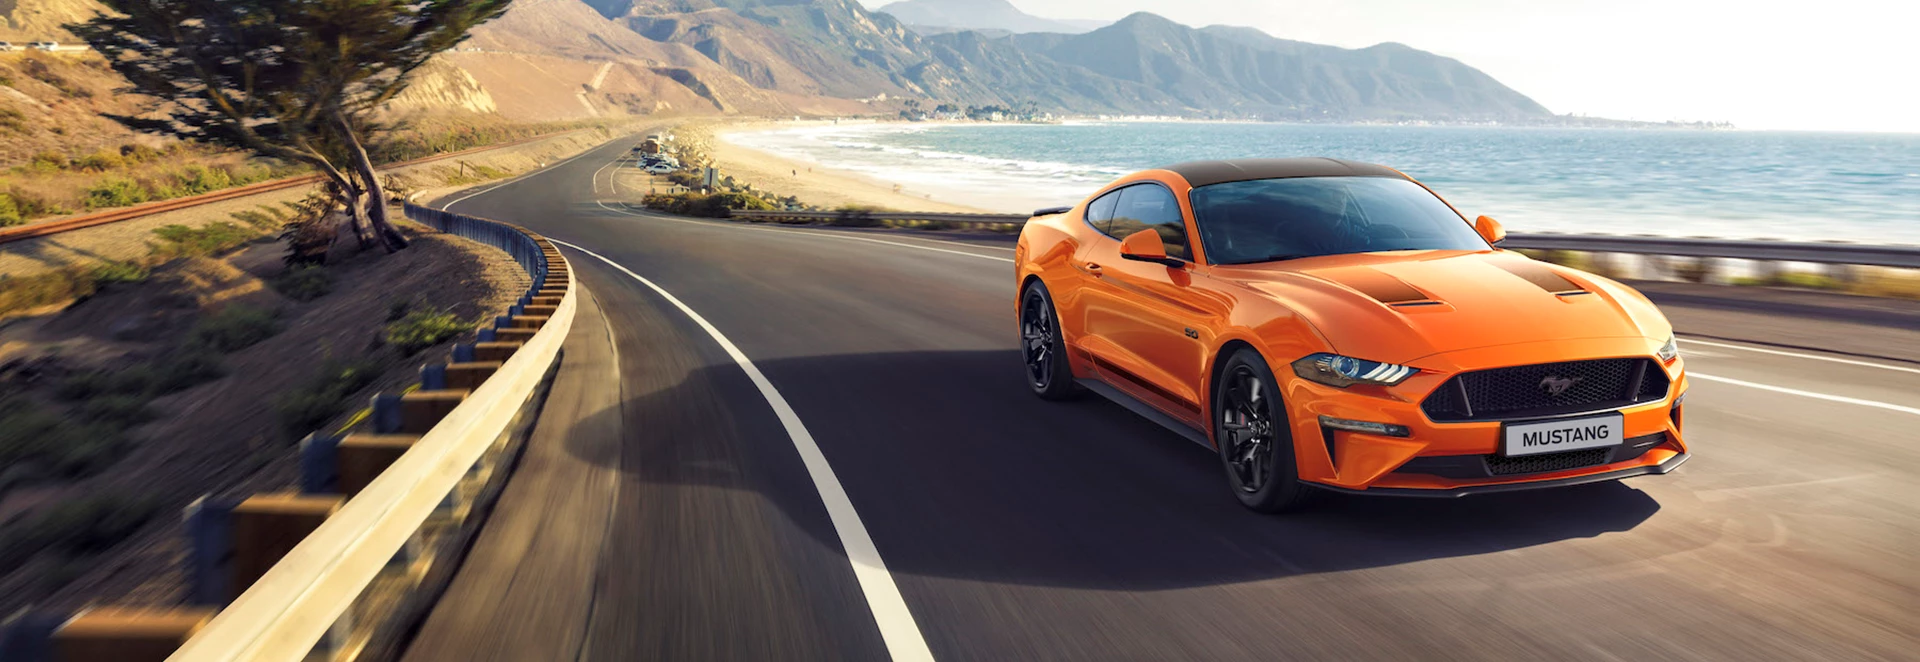 Ford celebrates 55 years of Mustang with new model upgrades